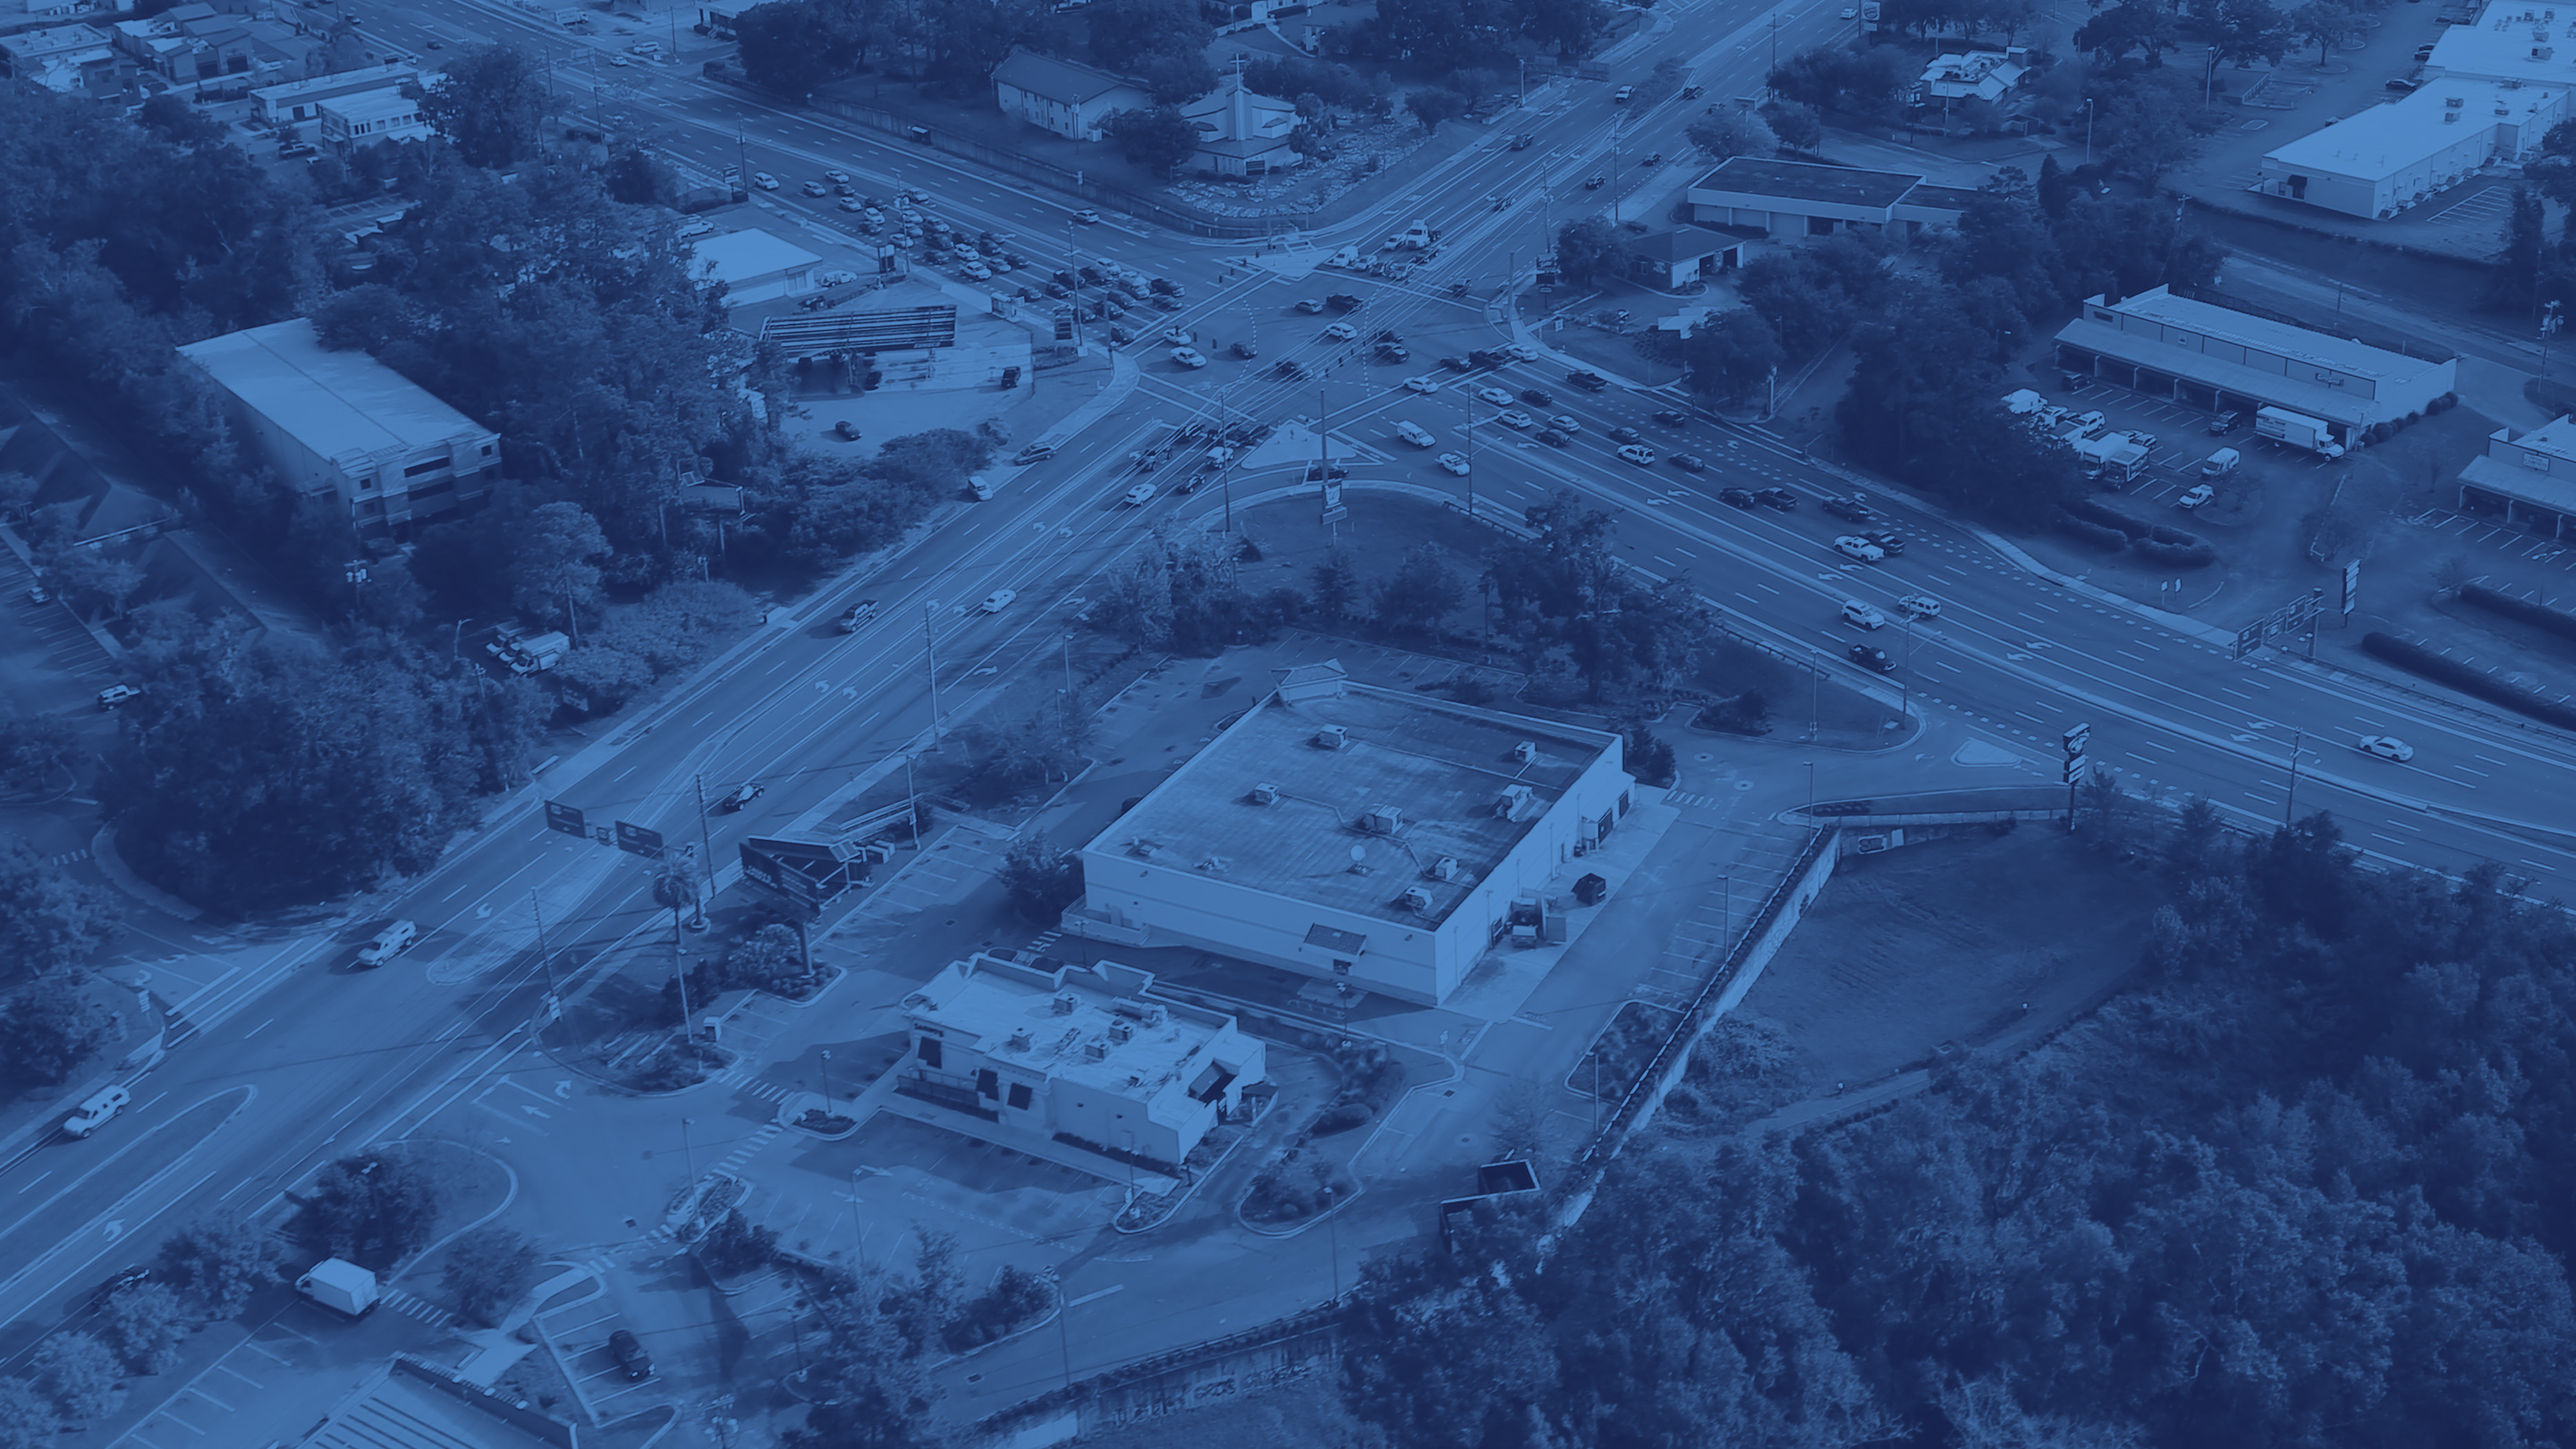 Background photo: Monochrome blue aerial photo of a city intersection